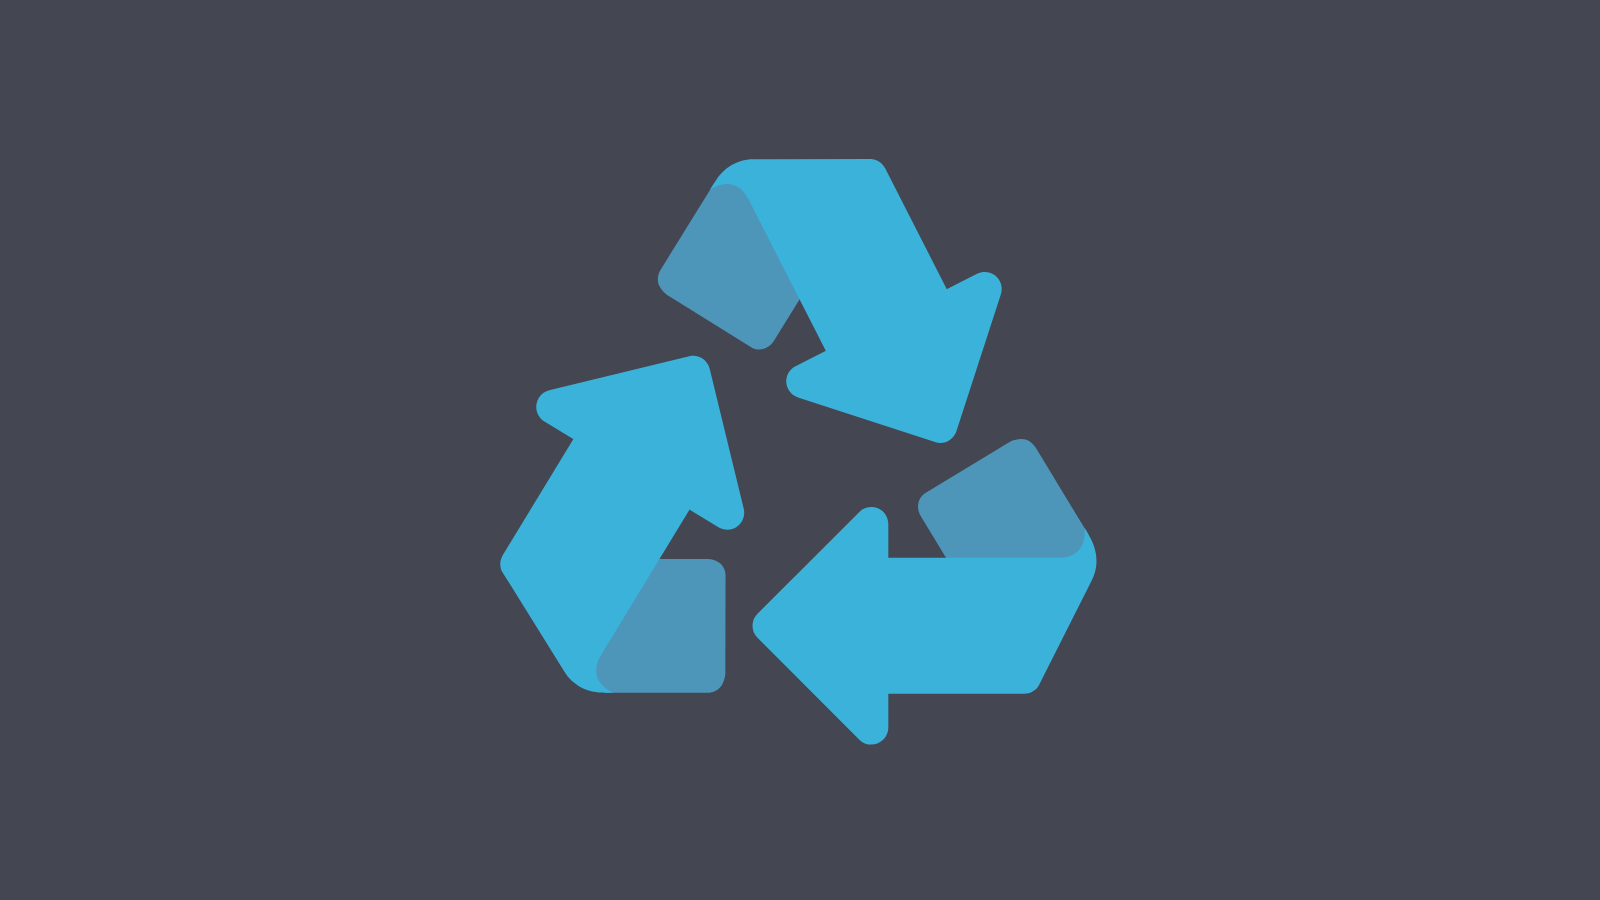 The recycle symbol